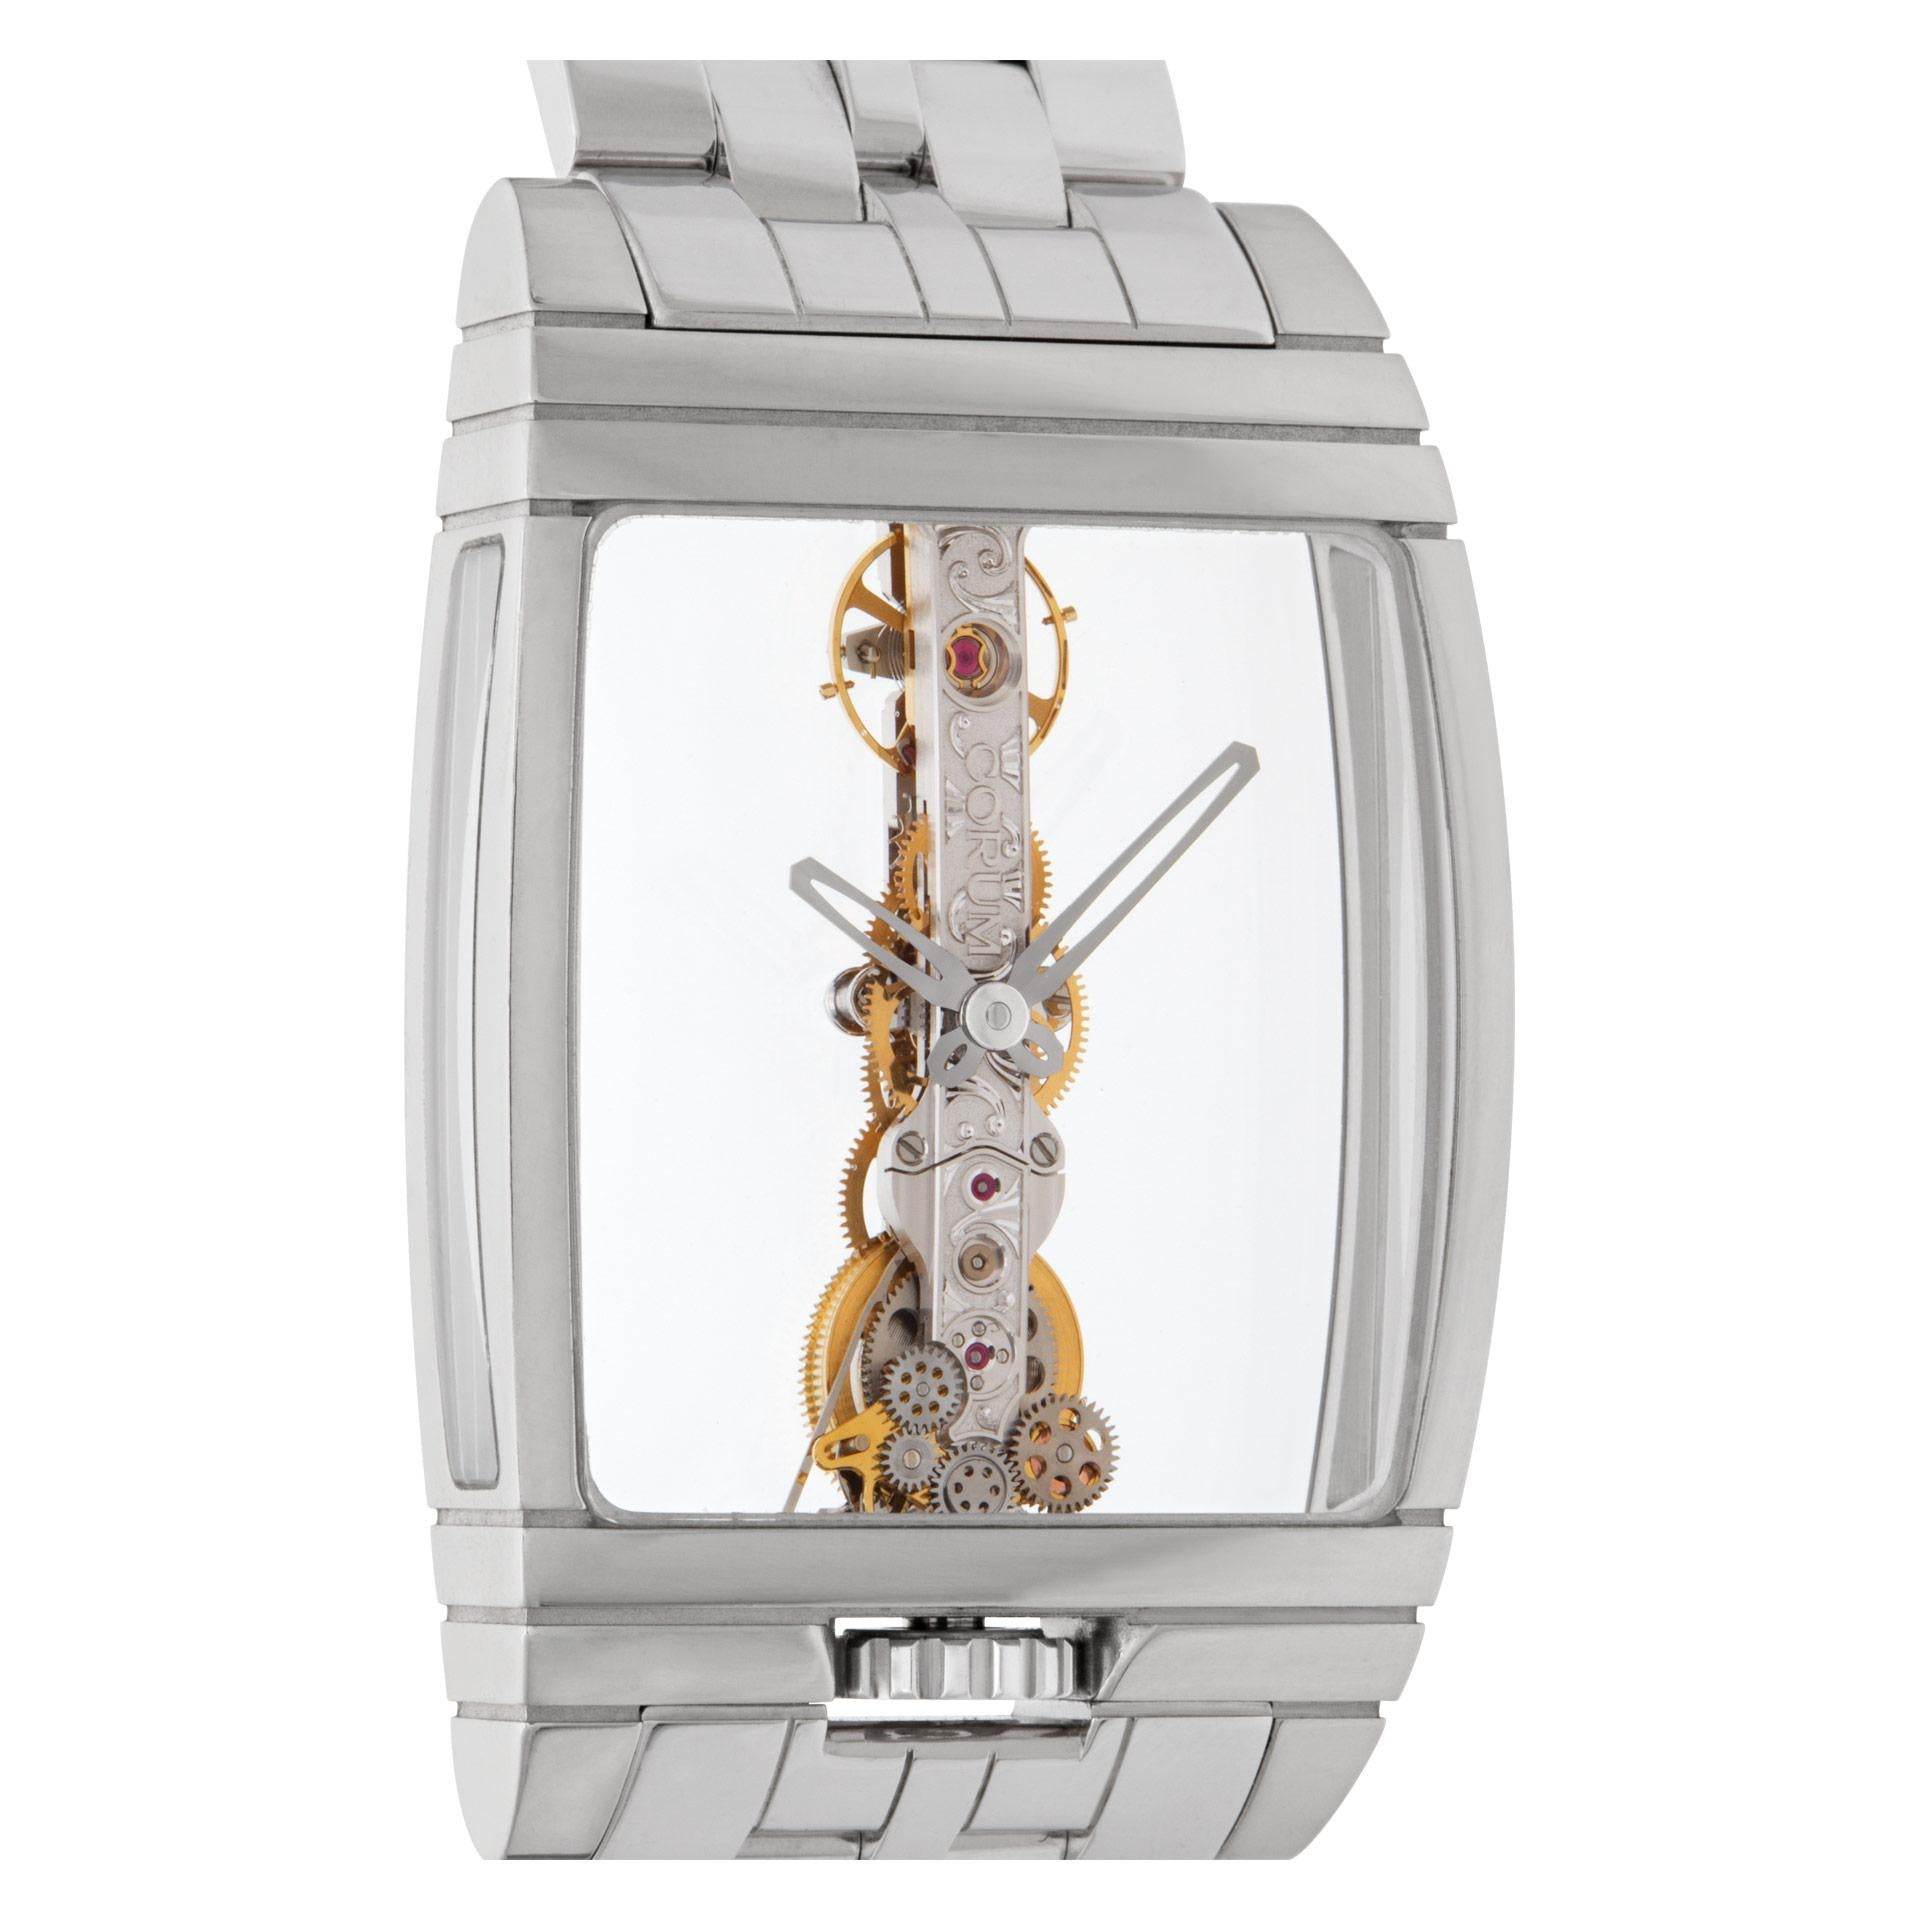 Men's Corum Bridge Watch in 18k White Gold, Box and Papers, Manual Wind